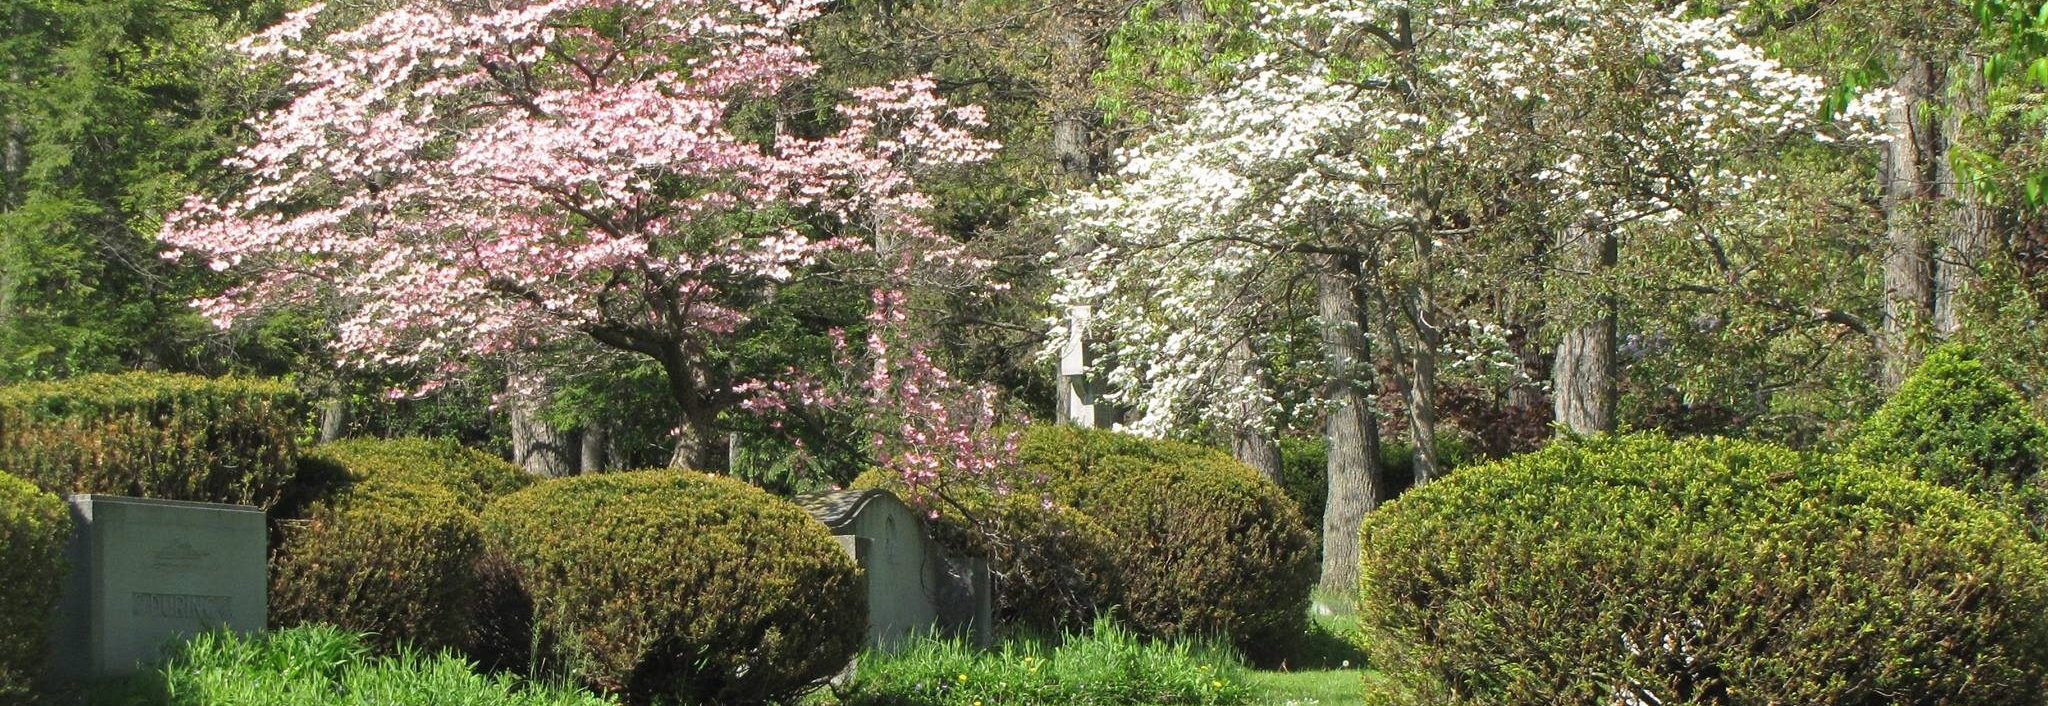 Oakwood Cemetery in the Spring time